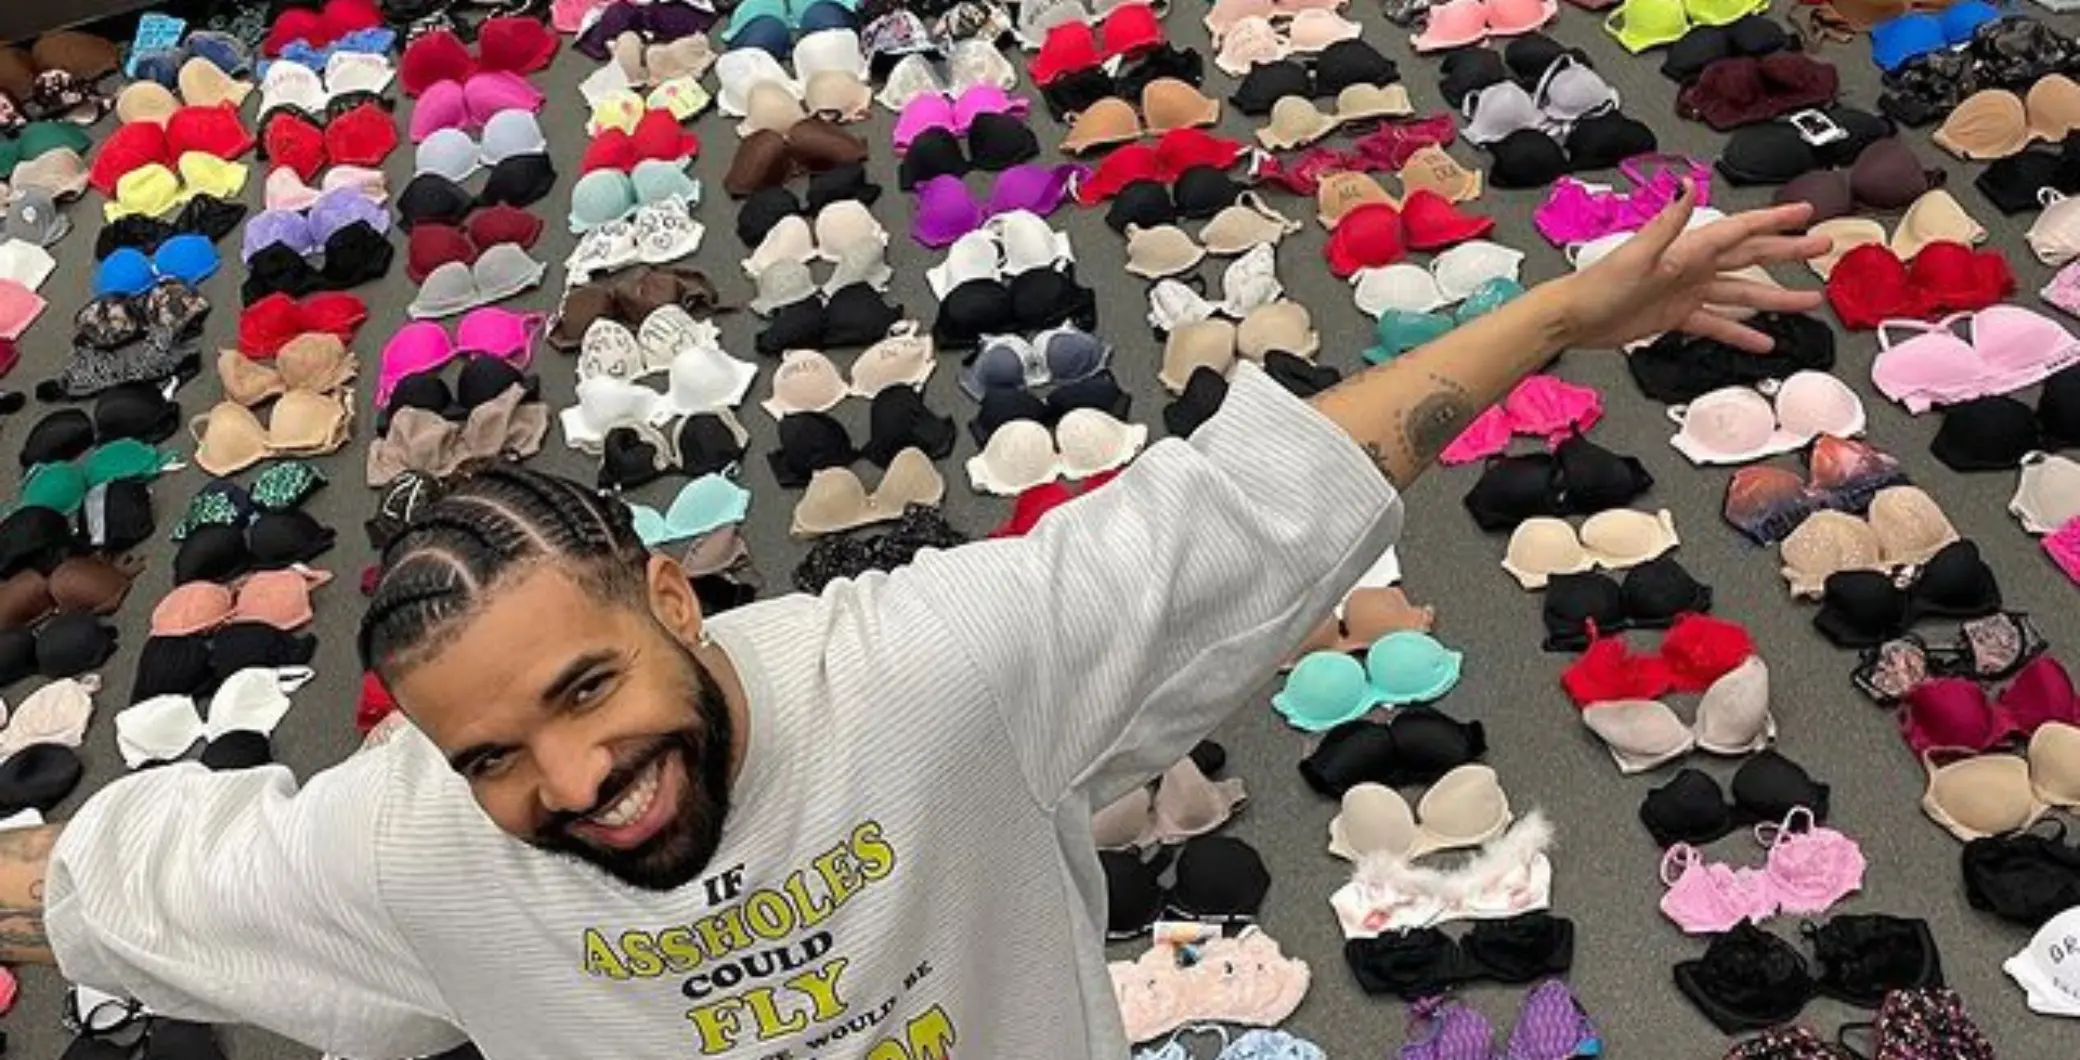 Drake showed off his massive bra collection courtesy of his fans